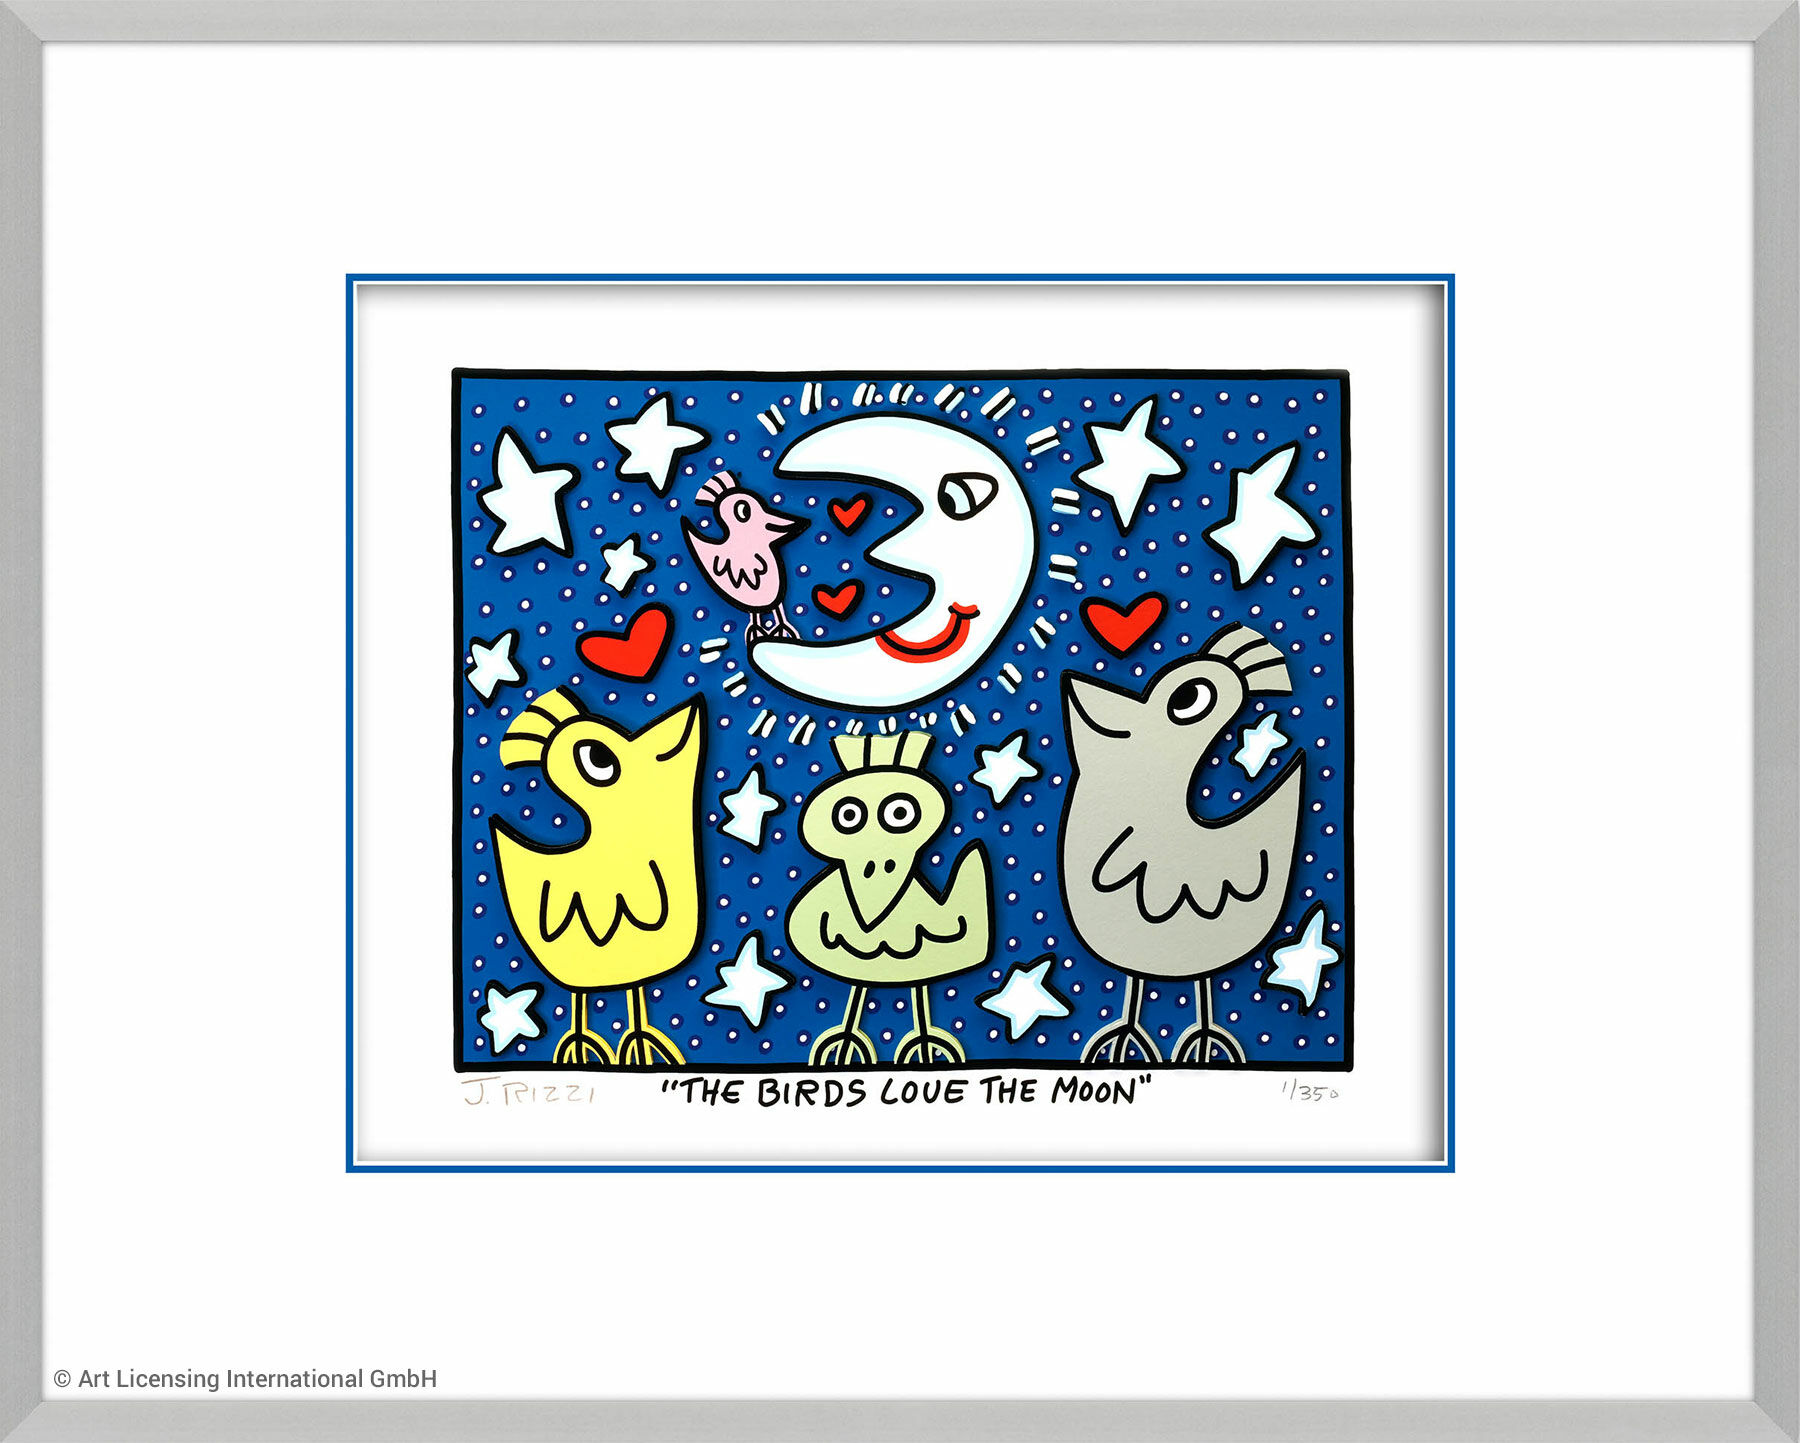 3D Picture "The Birds love the Moon" (2022), framed by James Rizzi